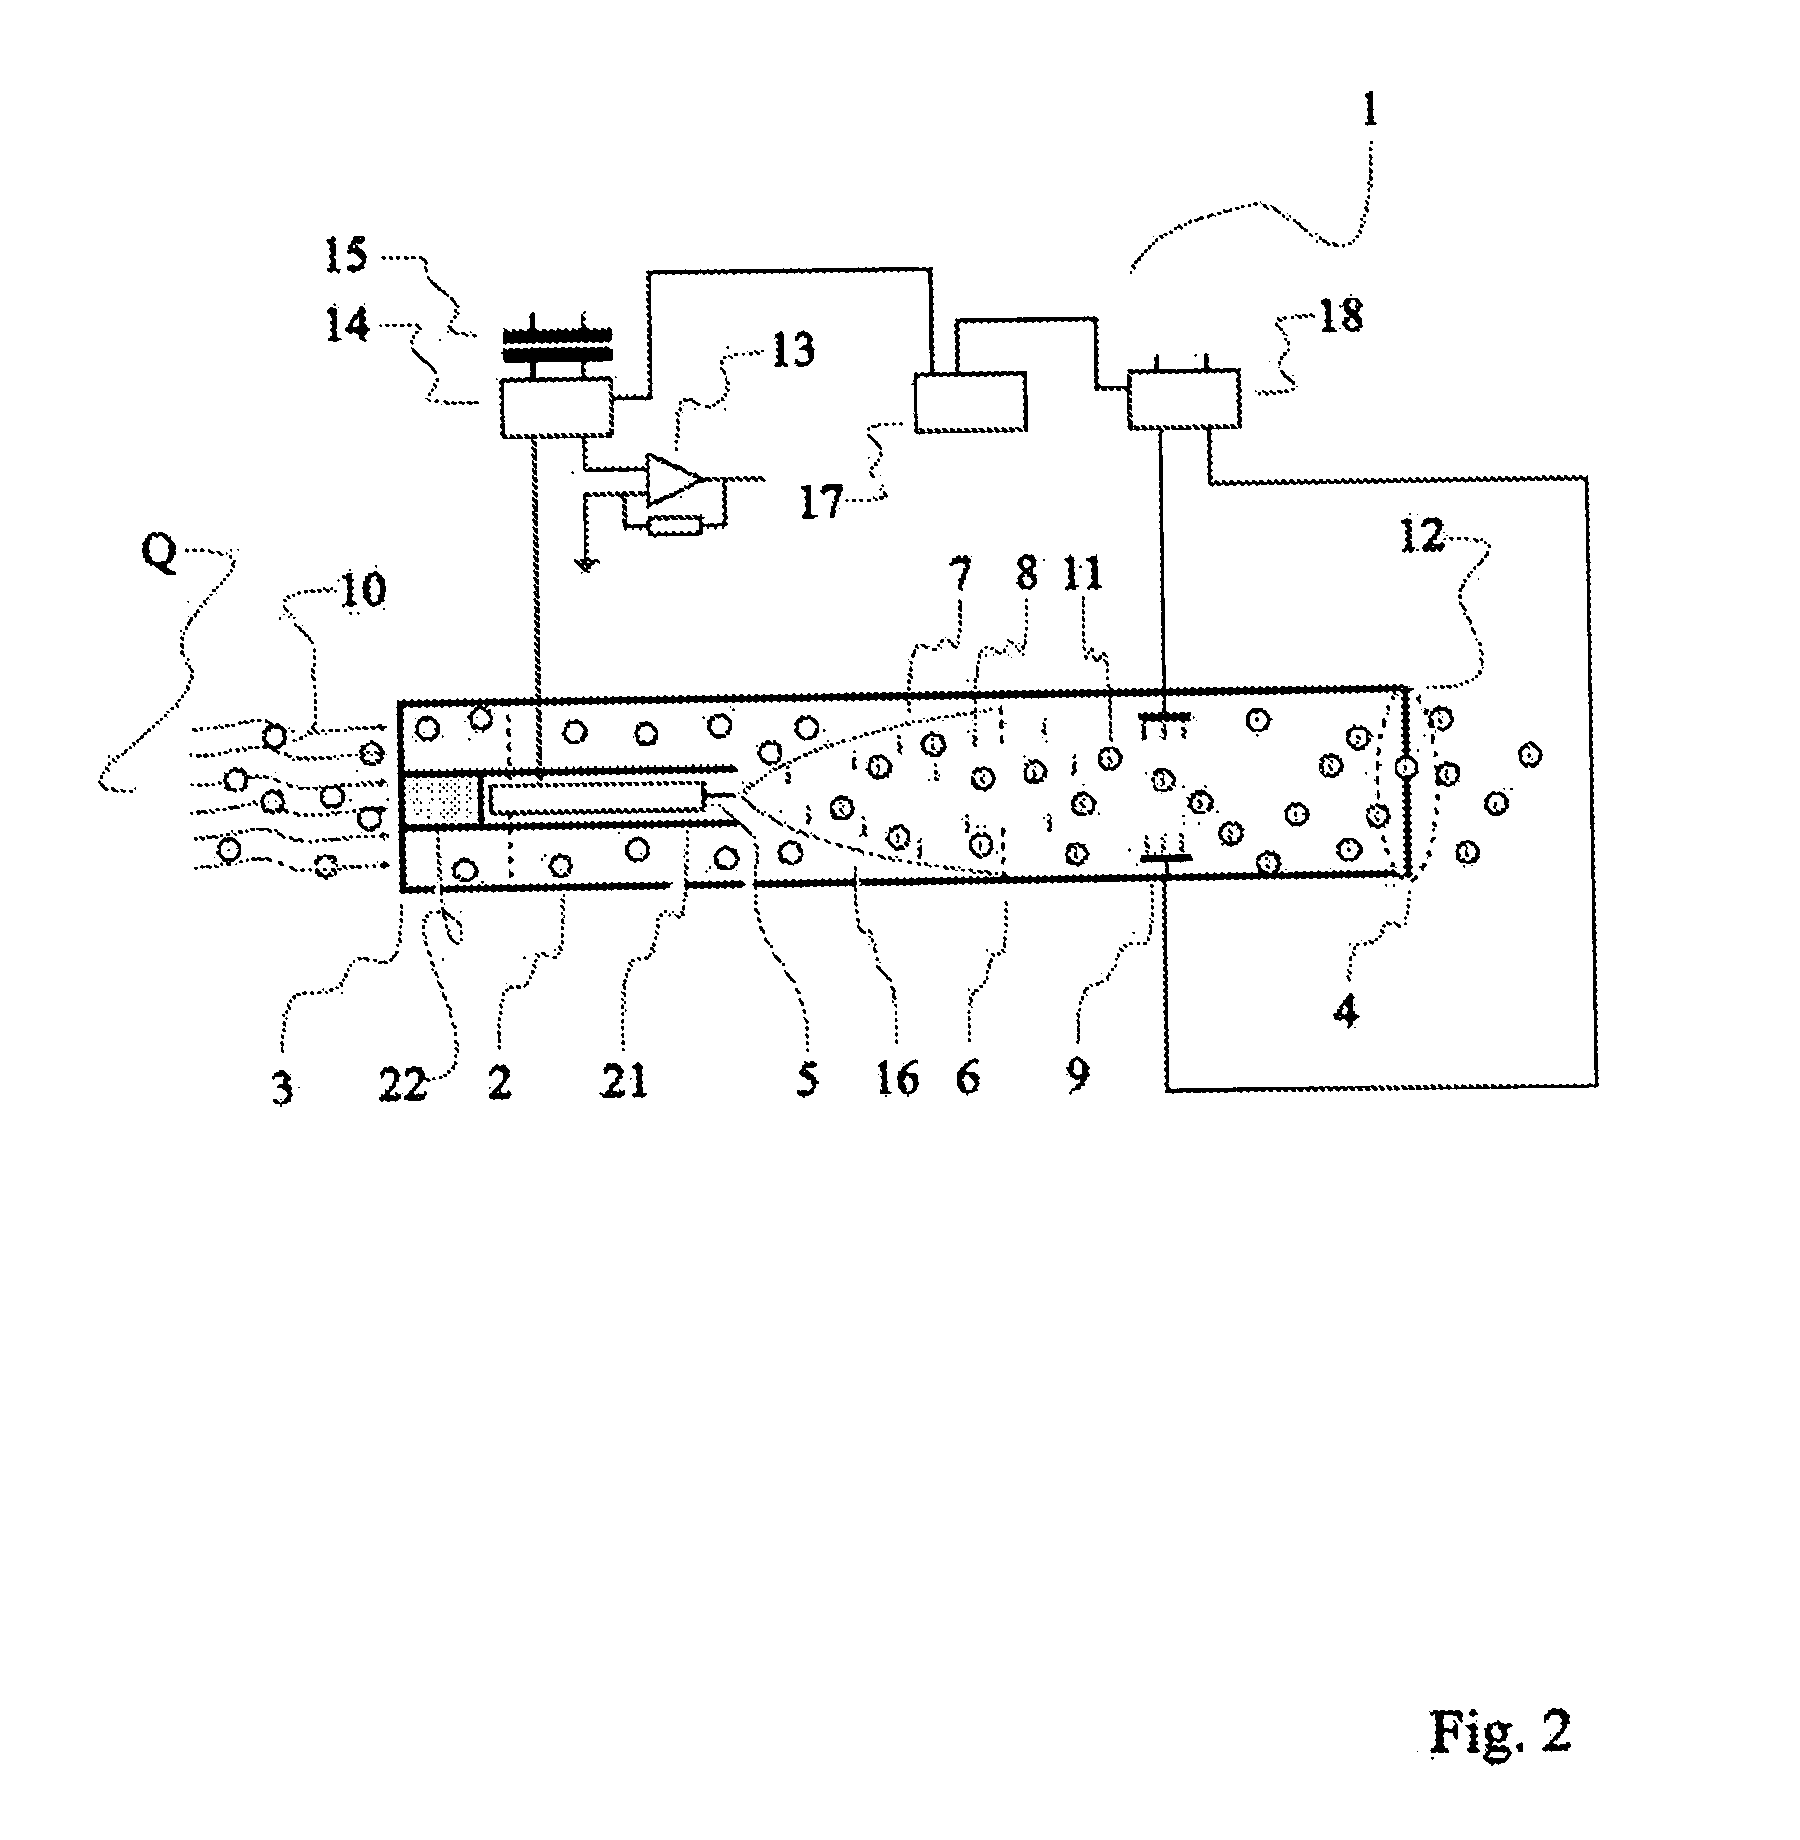 Apparatus and Process for Producing Acknowledged Air Flow and The Use of Such Apparatus in Measuring Particle Concentration in Acknowledged Air Flow